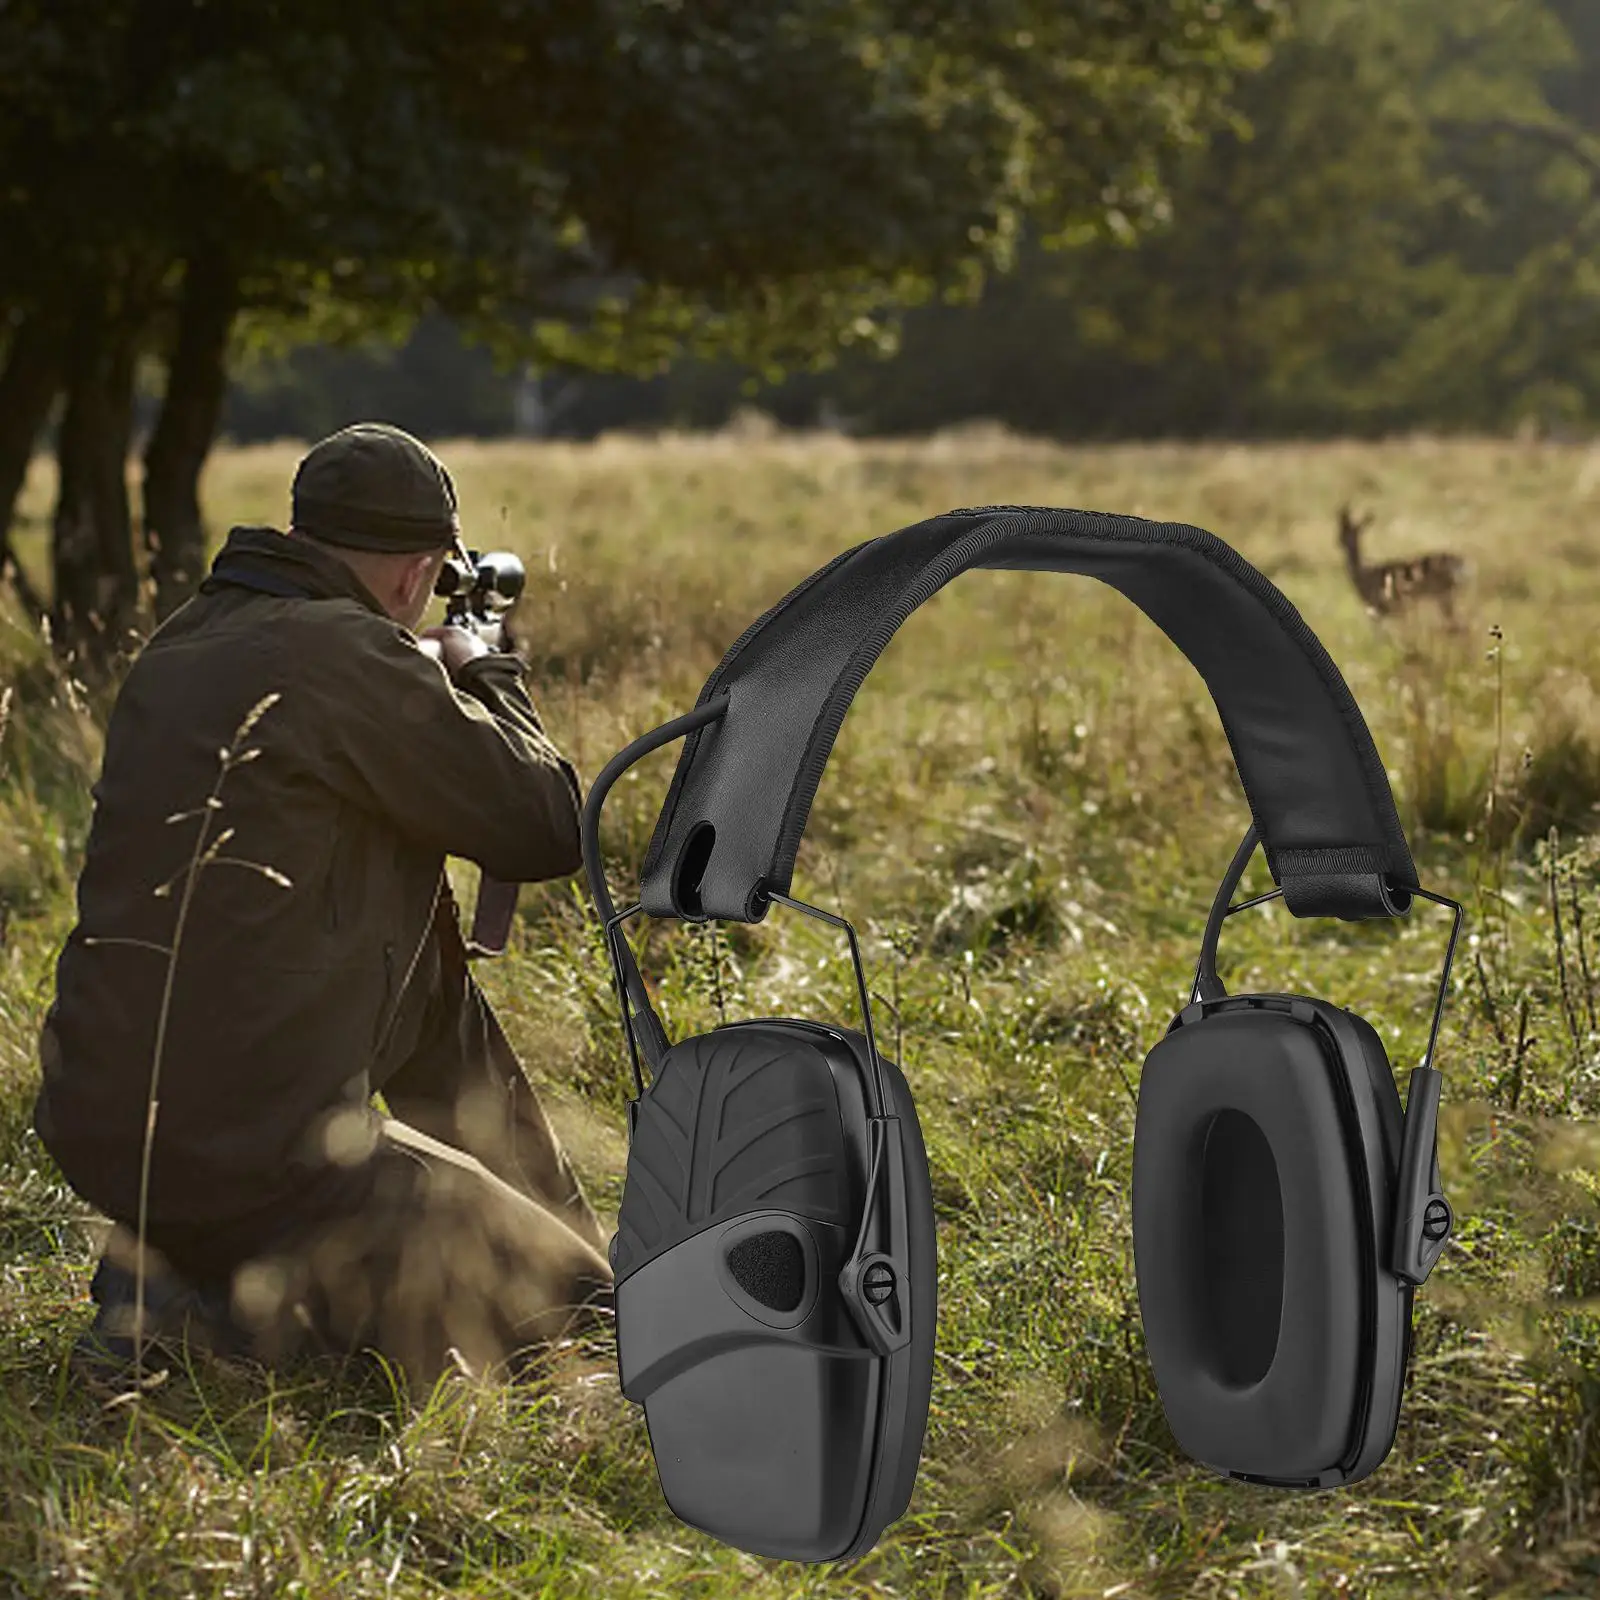 Head Mounted Ear Protection Earmuff Foldable Noise Cancelling Ear Protection Hearing Amplifiers Adjustable for Team Activities